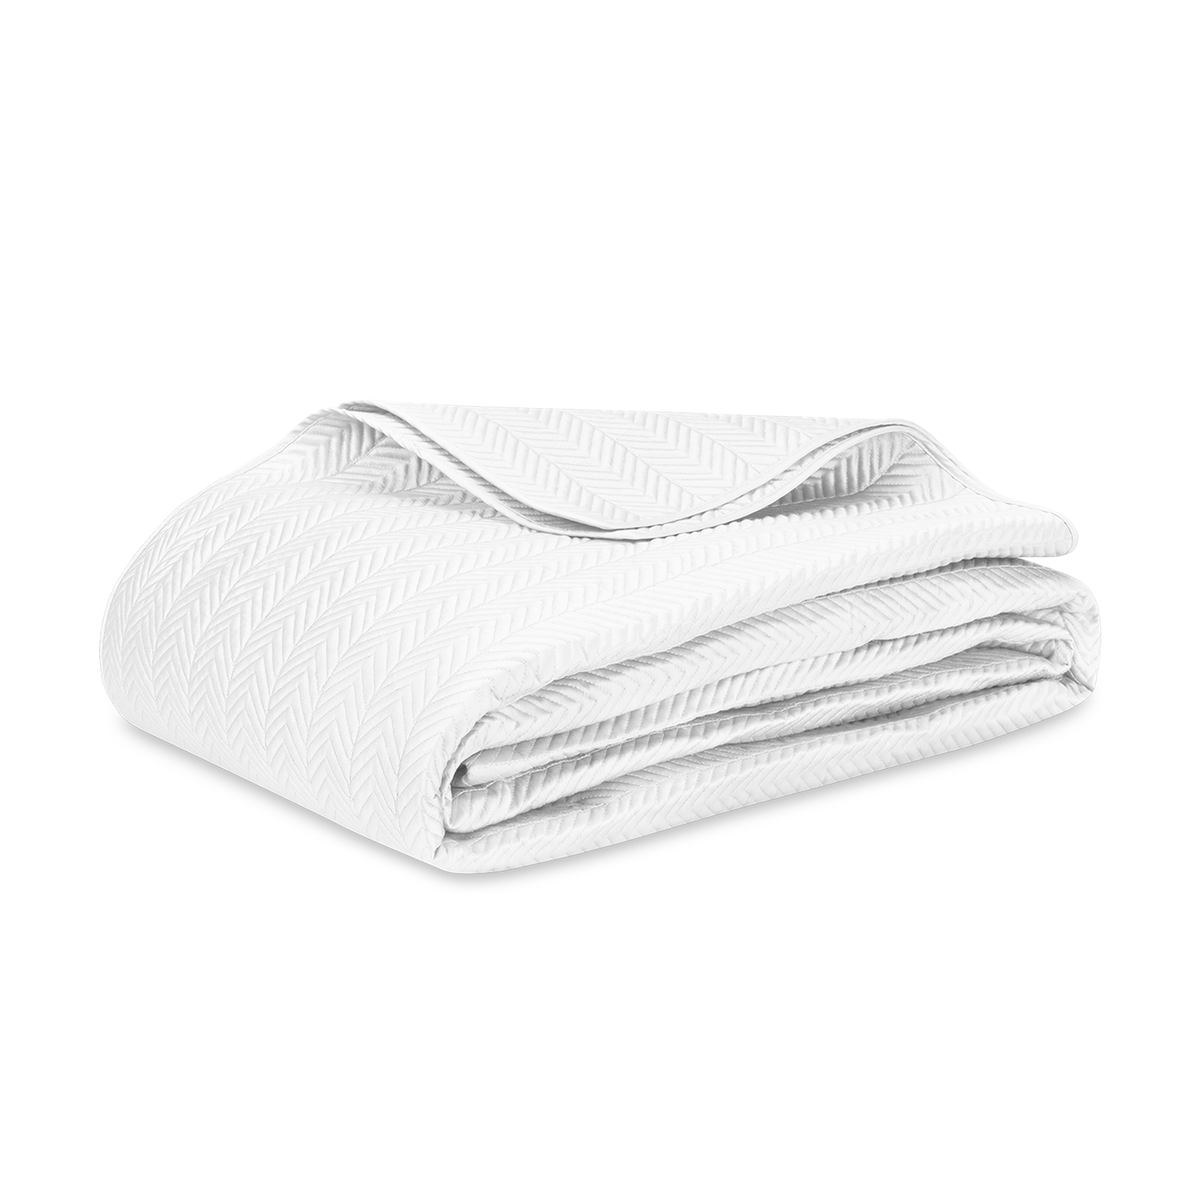 Coverlet of Matouk Netto Bedding in White Color